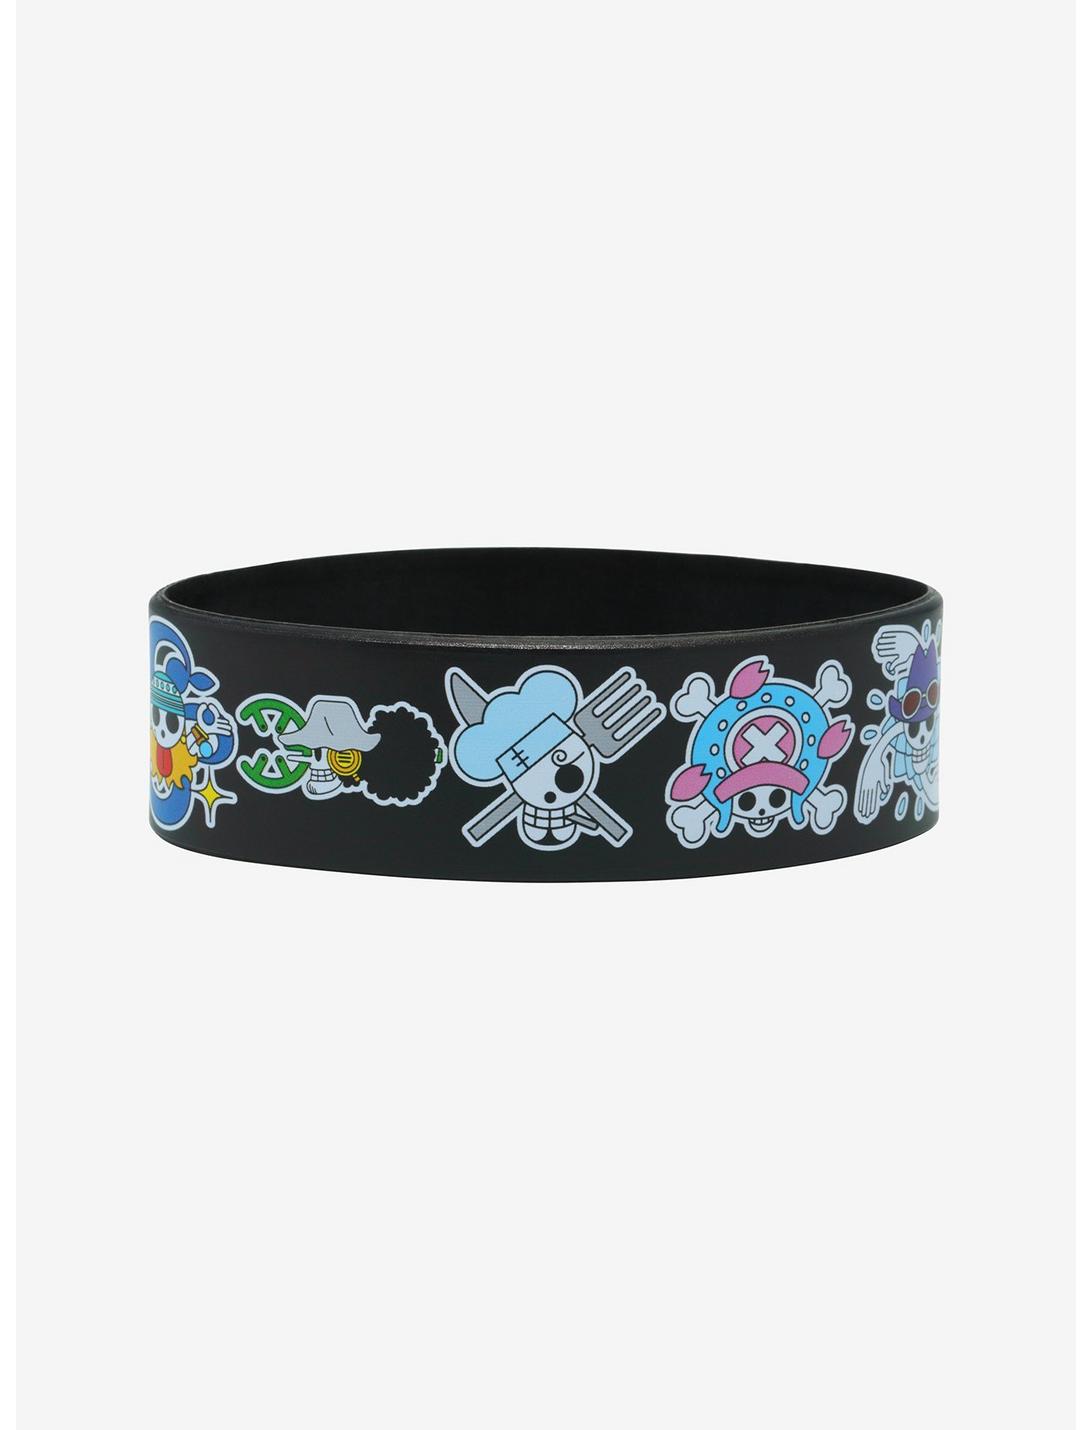 One Piece Straw Hat Pirates Jolly Rogers Rubber Bracelet, , hi-res